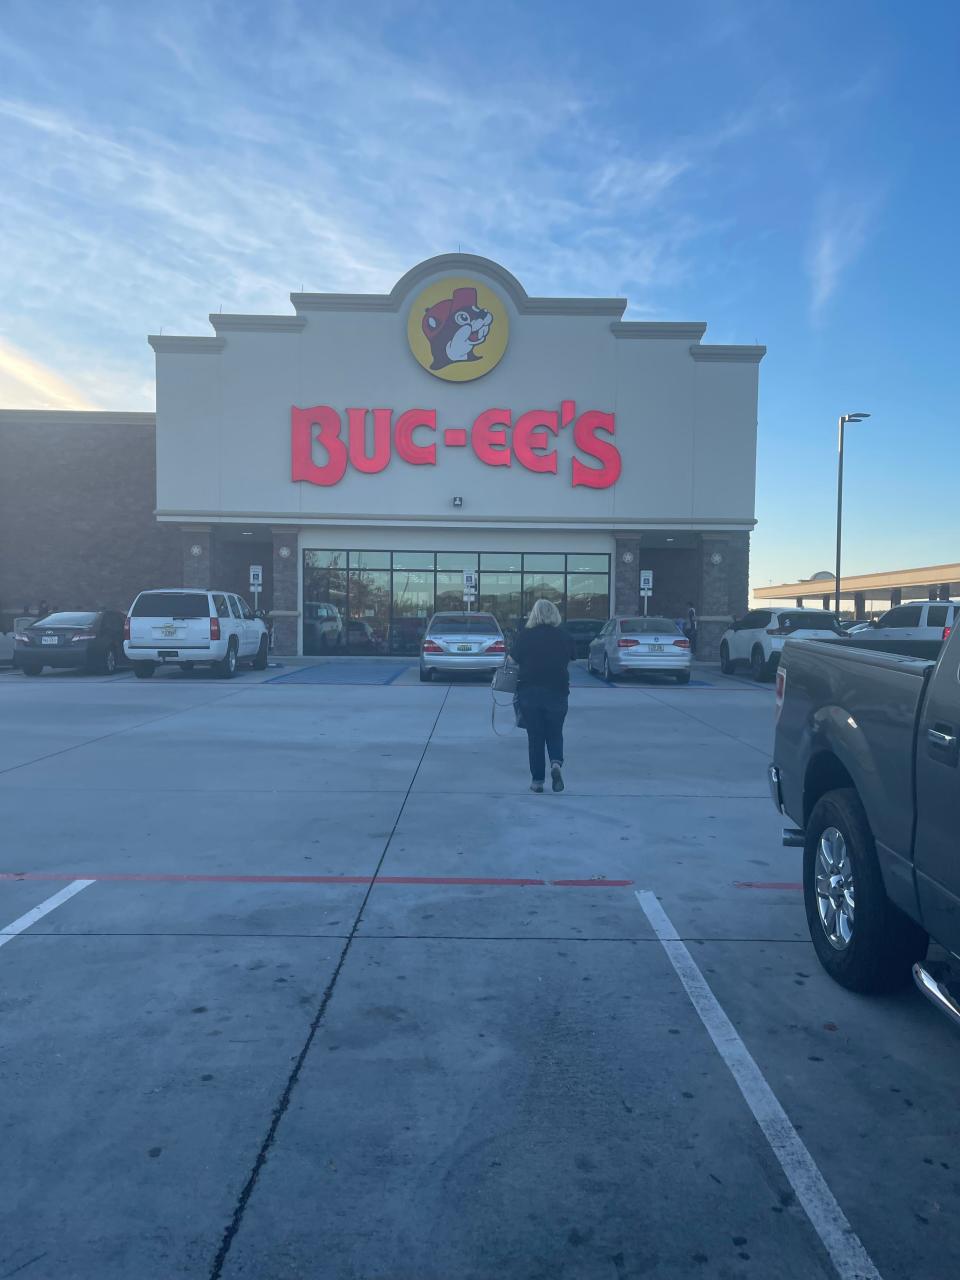 Fan buses make a stop at Buc-ee's in Robertsdale, Alabama on Friday, Nov. 26, 2021